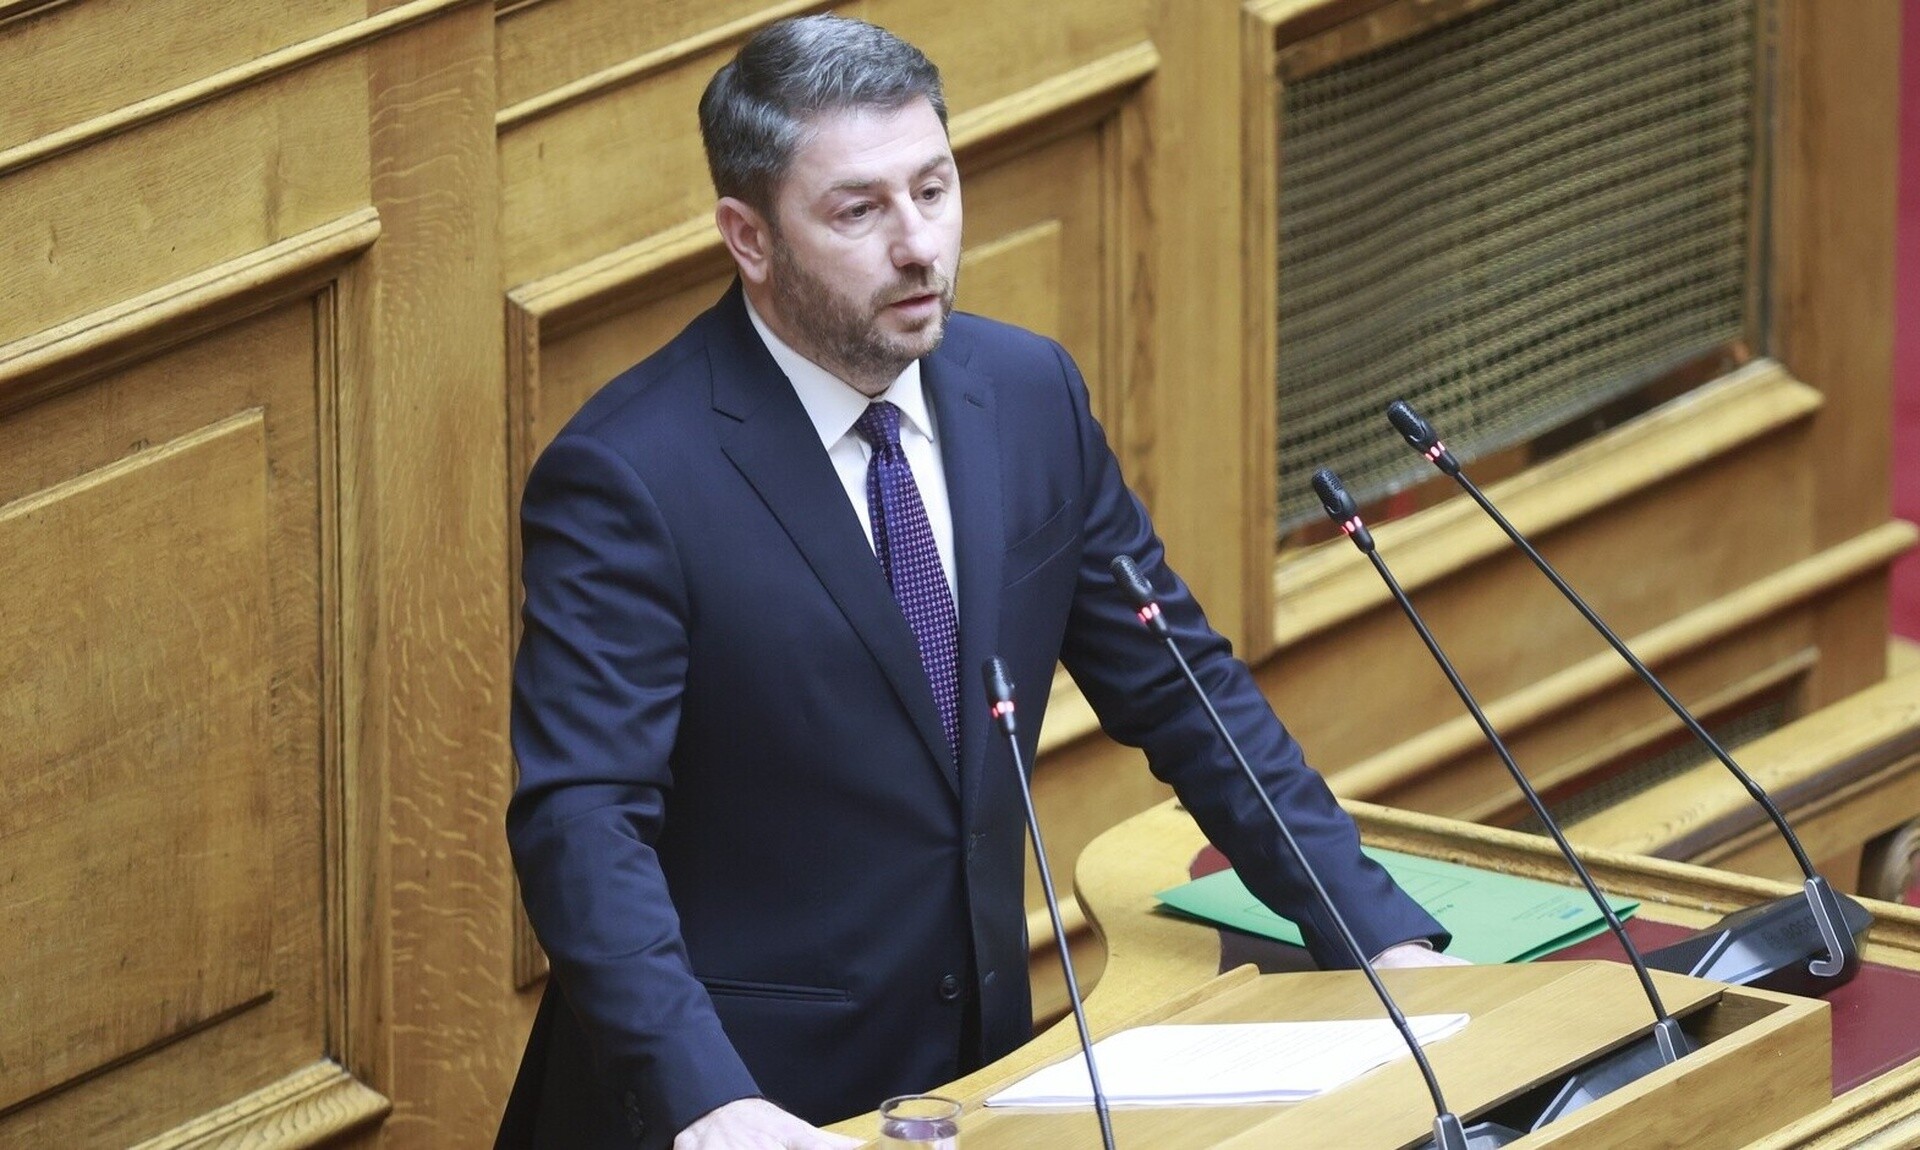 Androulakis: The aim of our party proposals is an improvement of daily life